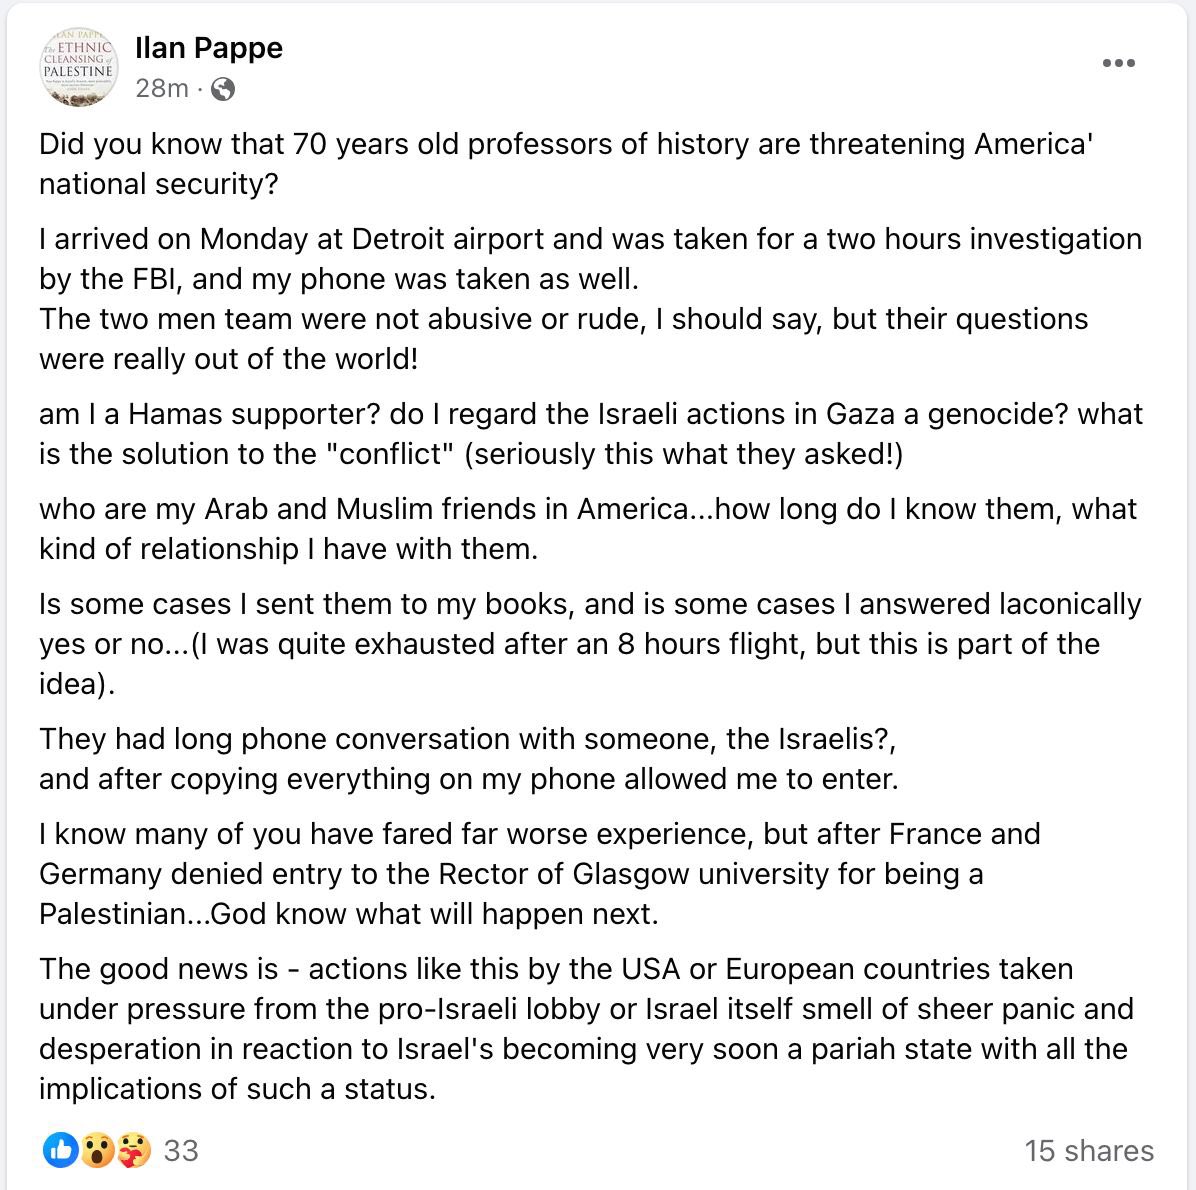 Famed historian Ilan Pappe says he was detained Monday at Detroit airport, questioned by federal agents and had his phone copied. “am I a Hamas supporter? do I regard the Israeli actions in Gaza a genocide? what is the solution to the 'conflict' (seriously this what they asked!)”